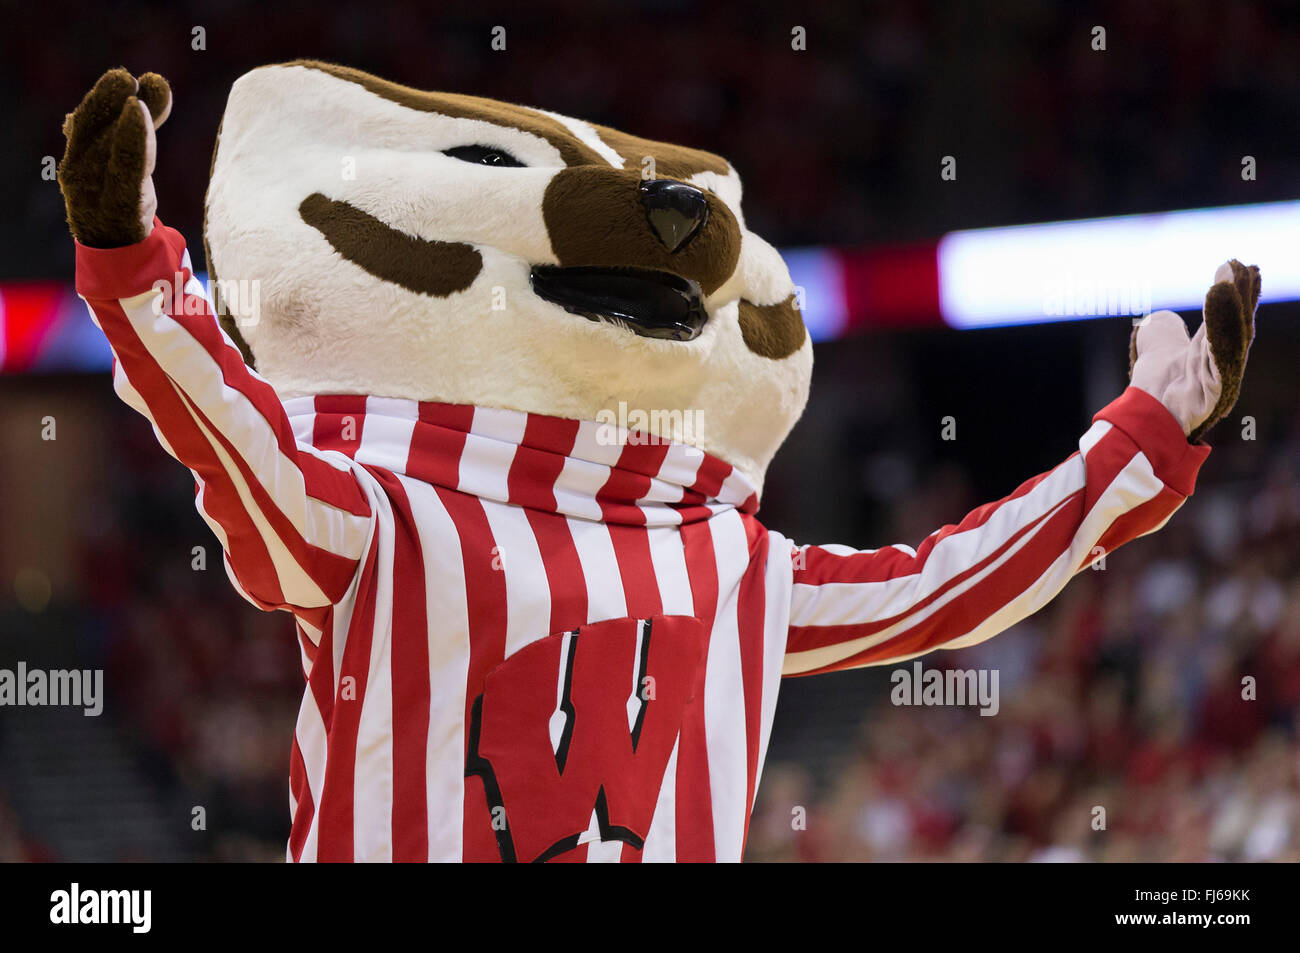 Madison, WI, USA. 28th Feb, 2016. Bucky Badger during the NCAA Basketball game between the Michigan Wolverines and the Wisconsin Badgers at the Kohl Center in Madison, WI. Wisconsin defeated Michigan 68-57. John Fisher/CSM/Alamy Live News Stock Photo